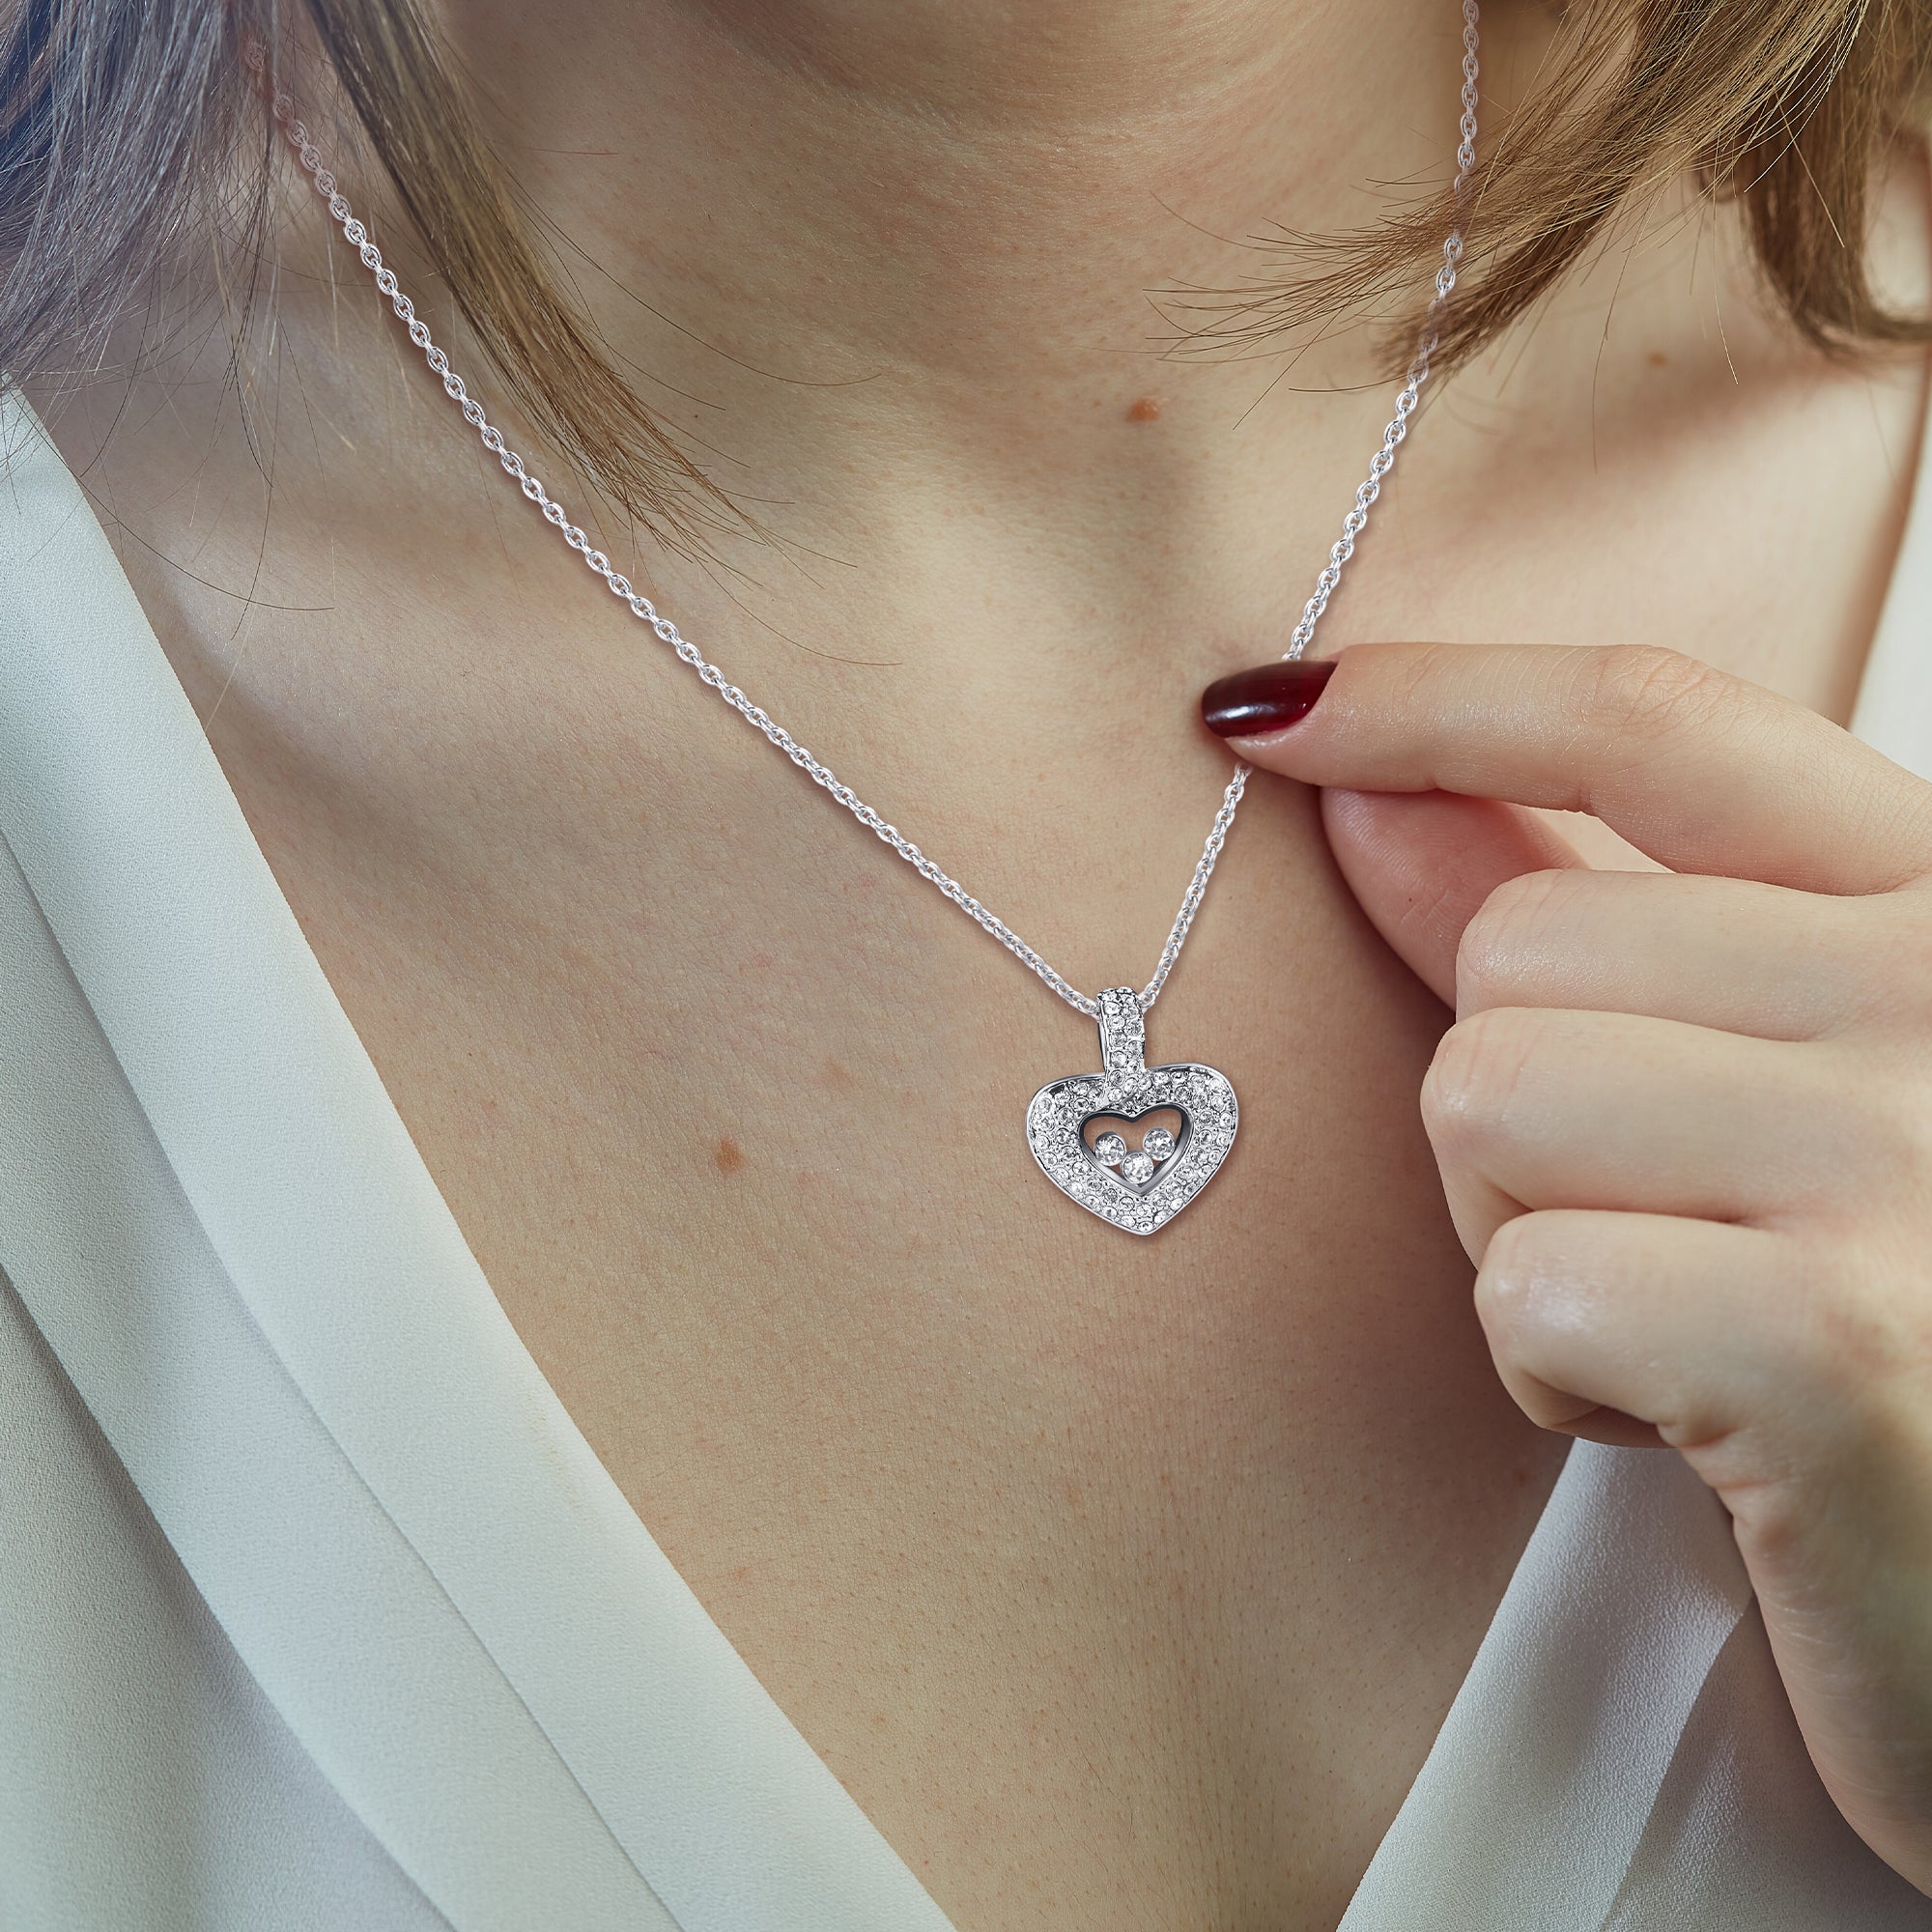 To My Dear Sister - I Appreciate All You Do - Tryndi Floating Heart Necklace